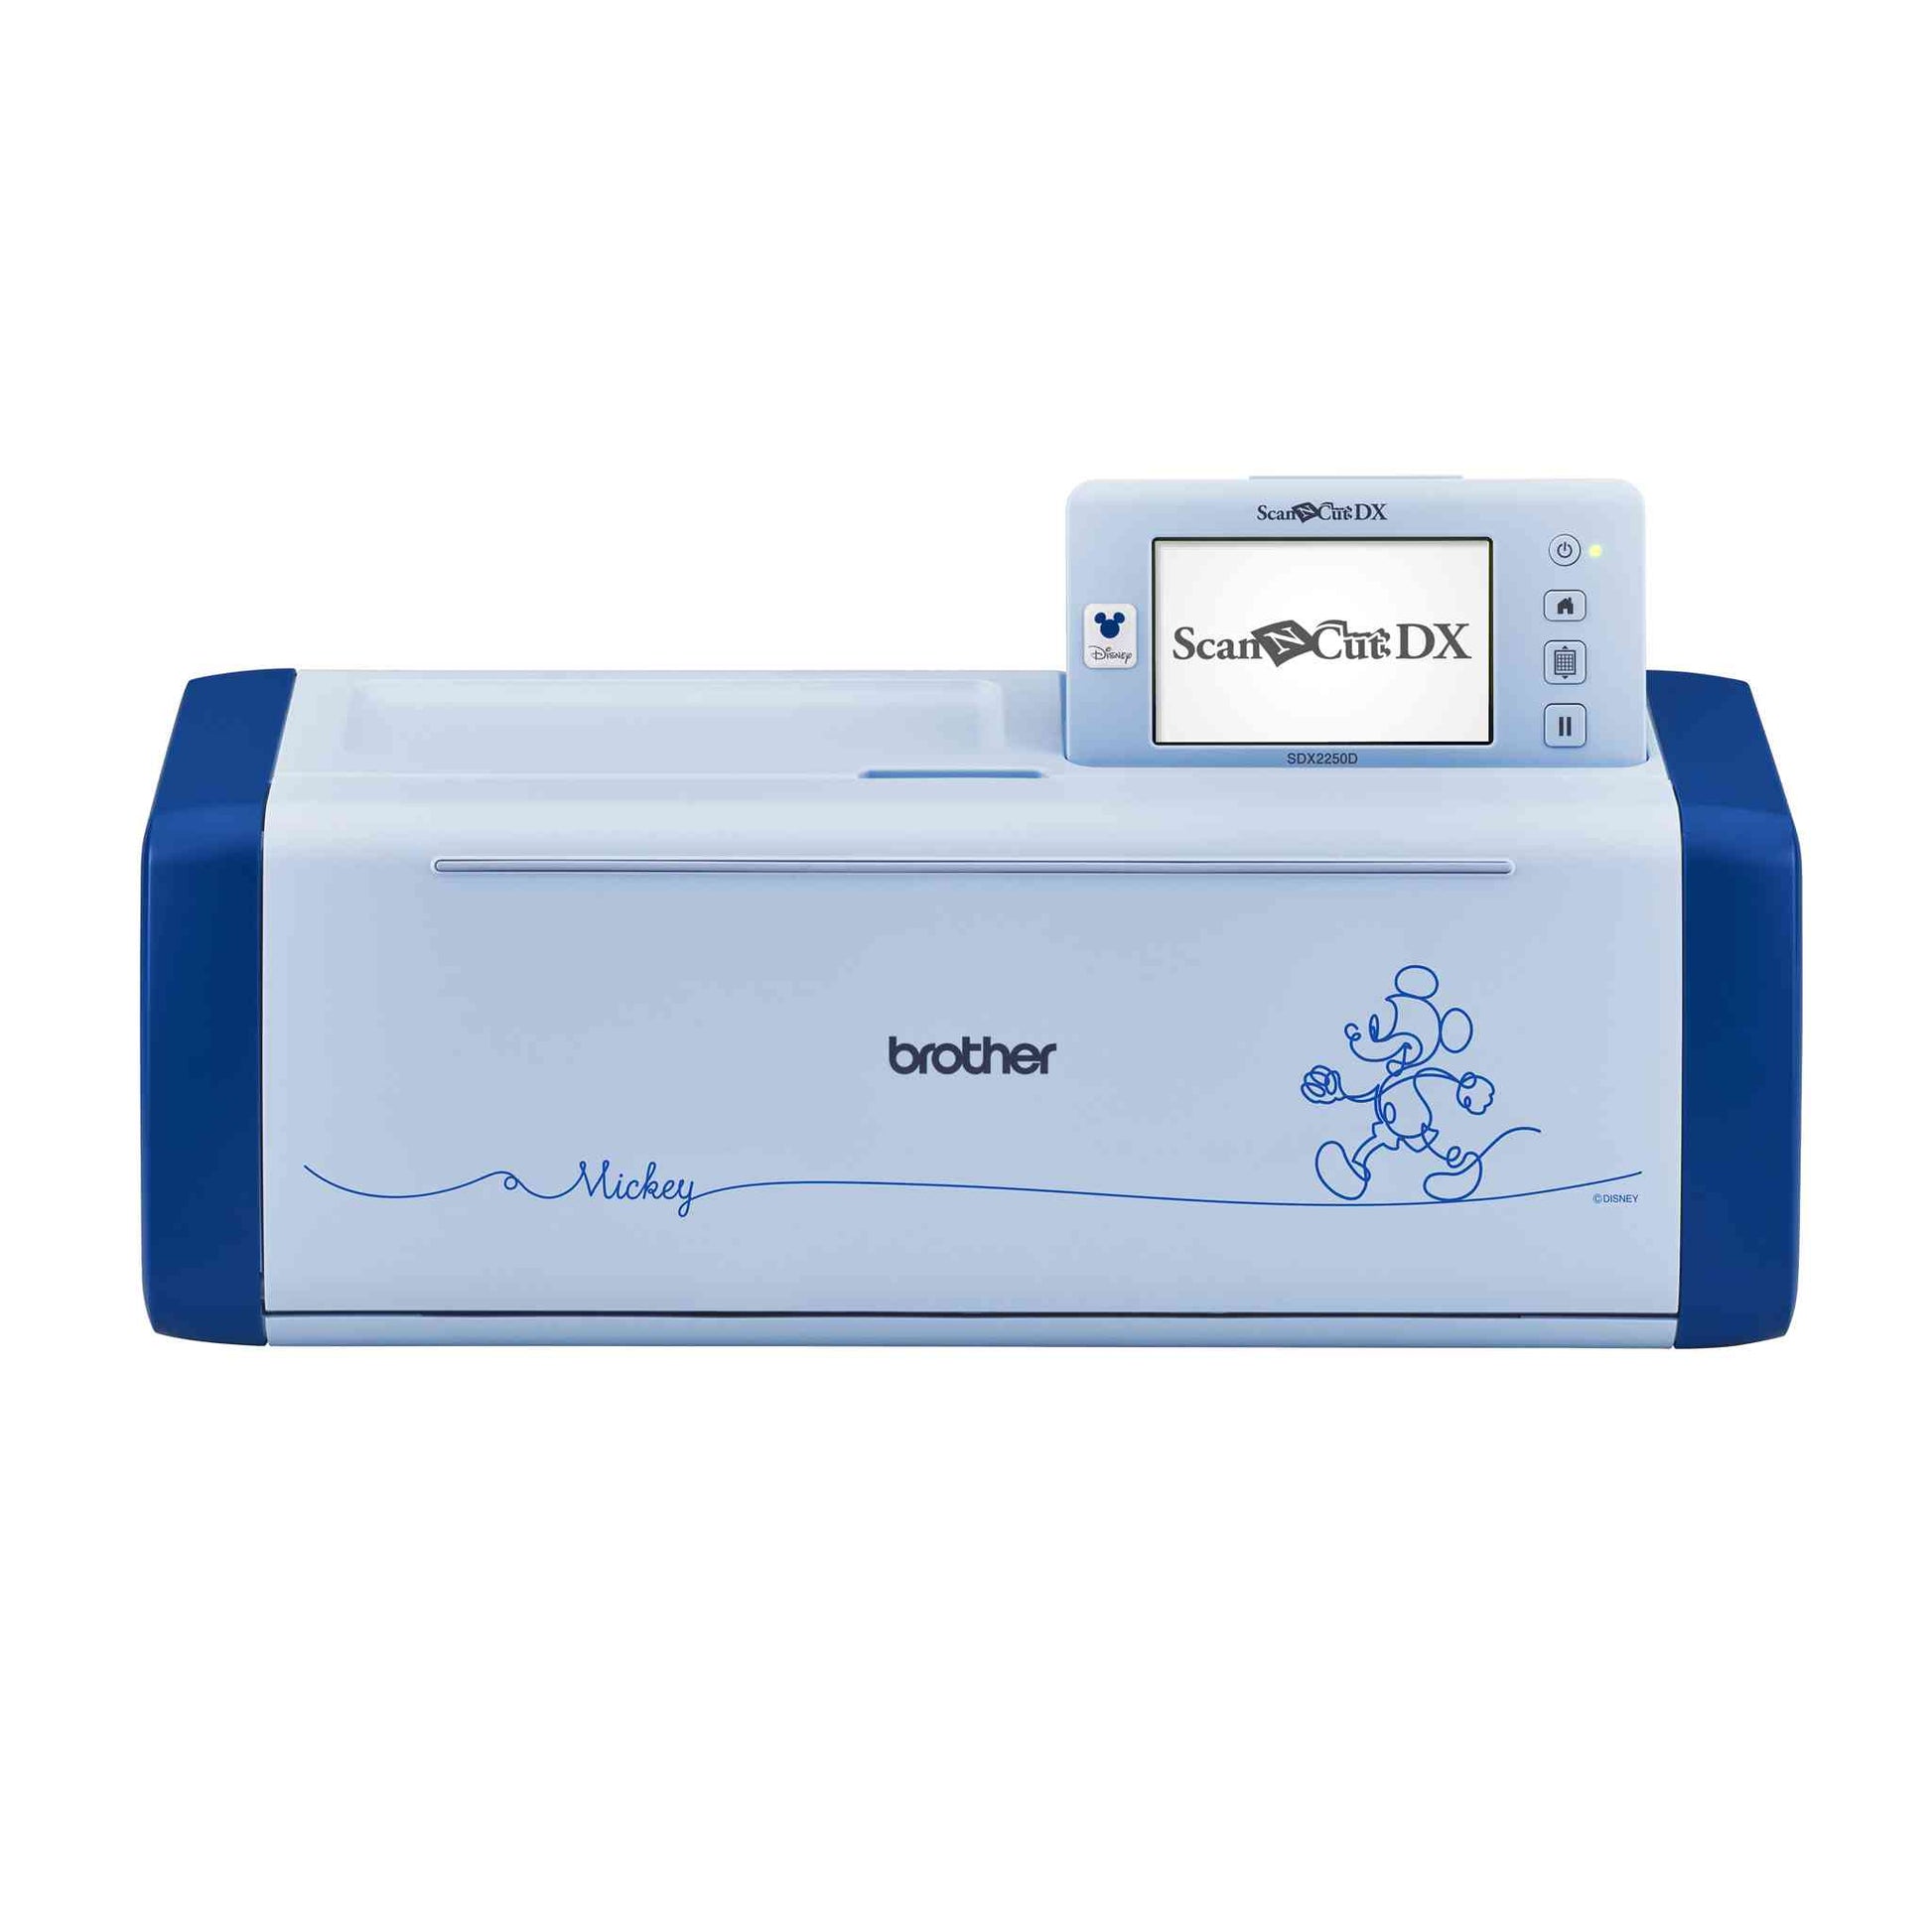 Brother ScanNCut SDX2250D Disney plotter front closed